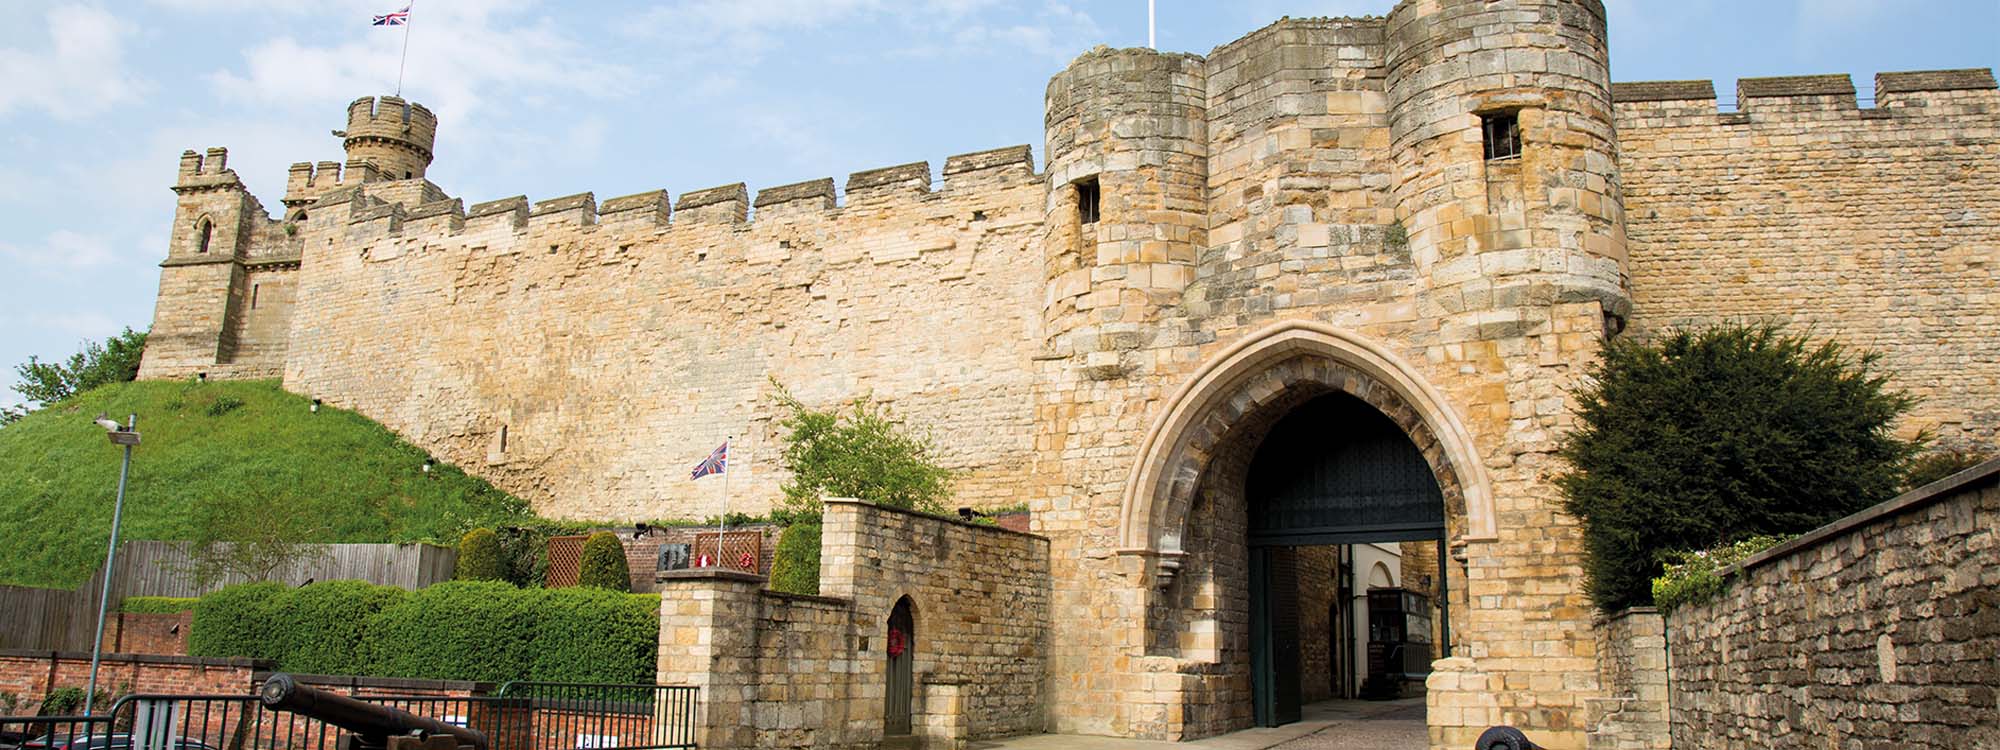 The gatehouse and walls of Lincoln castle